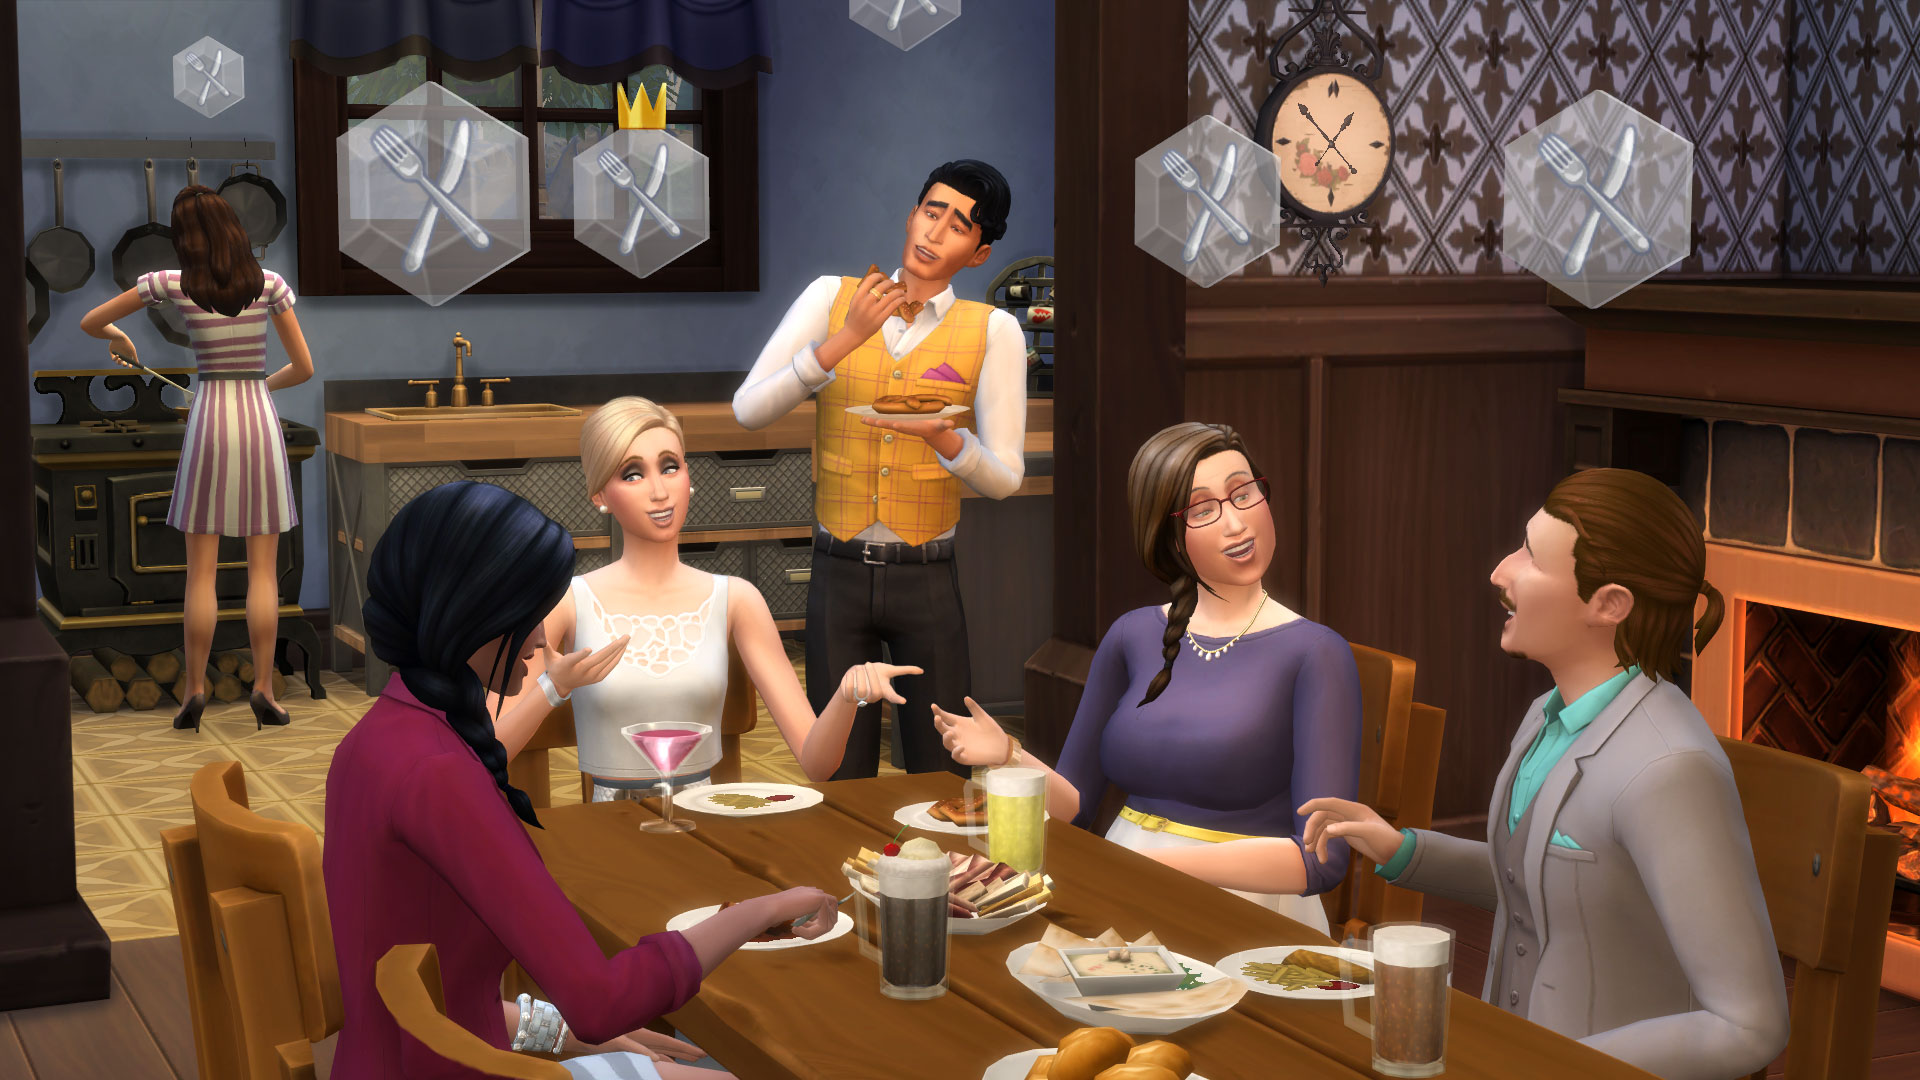 The Sims 4: Get Together - screenshot 6